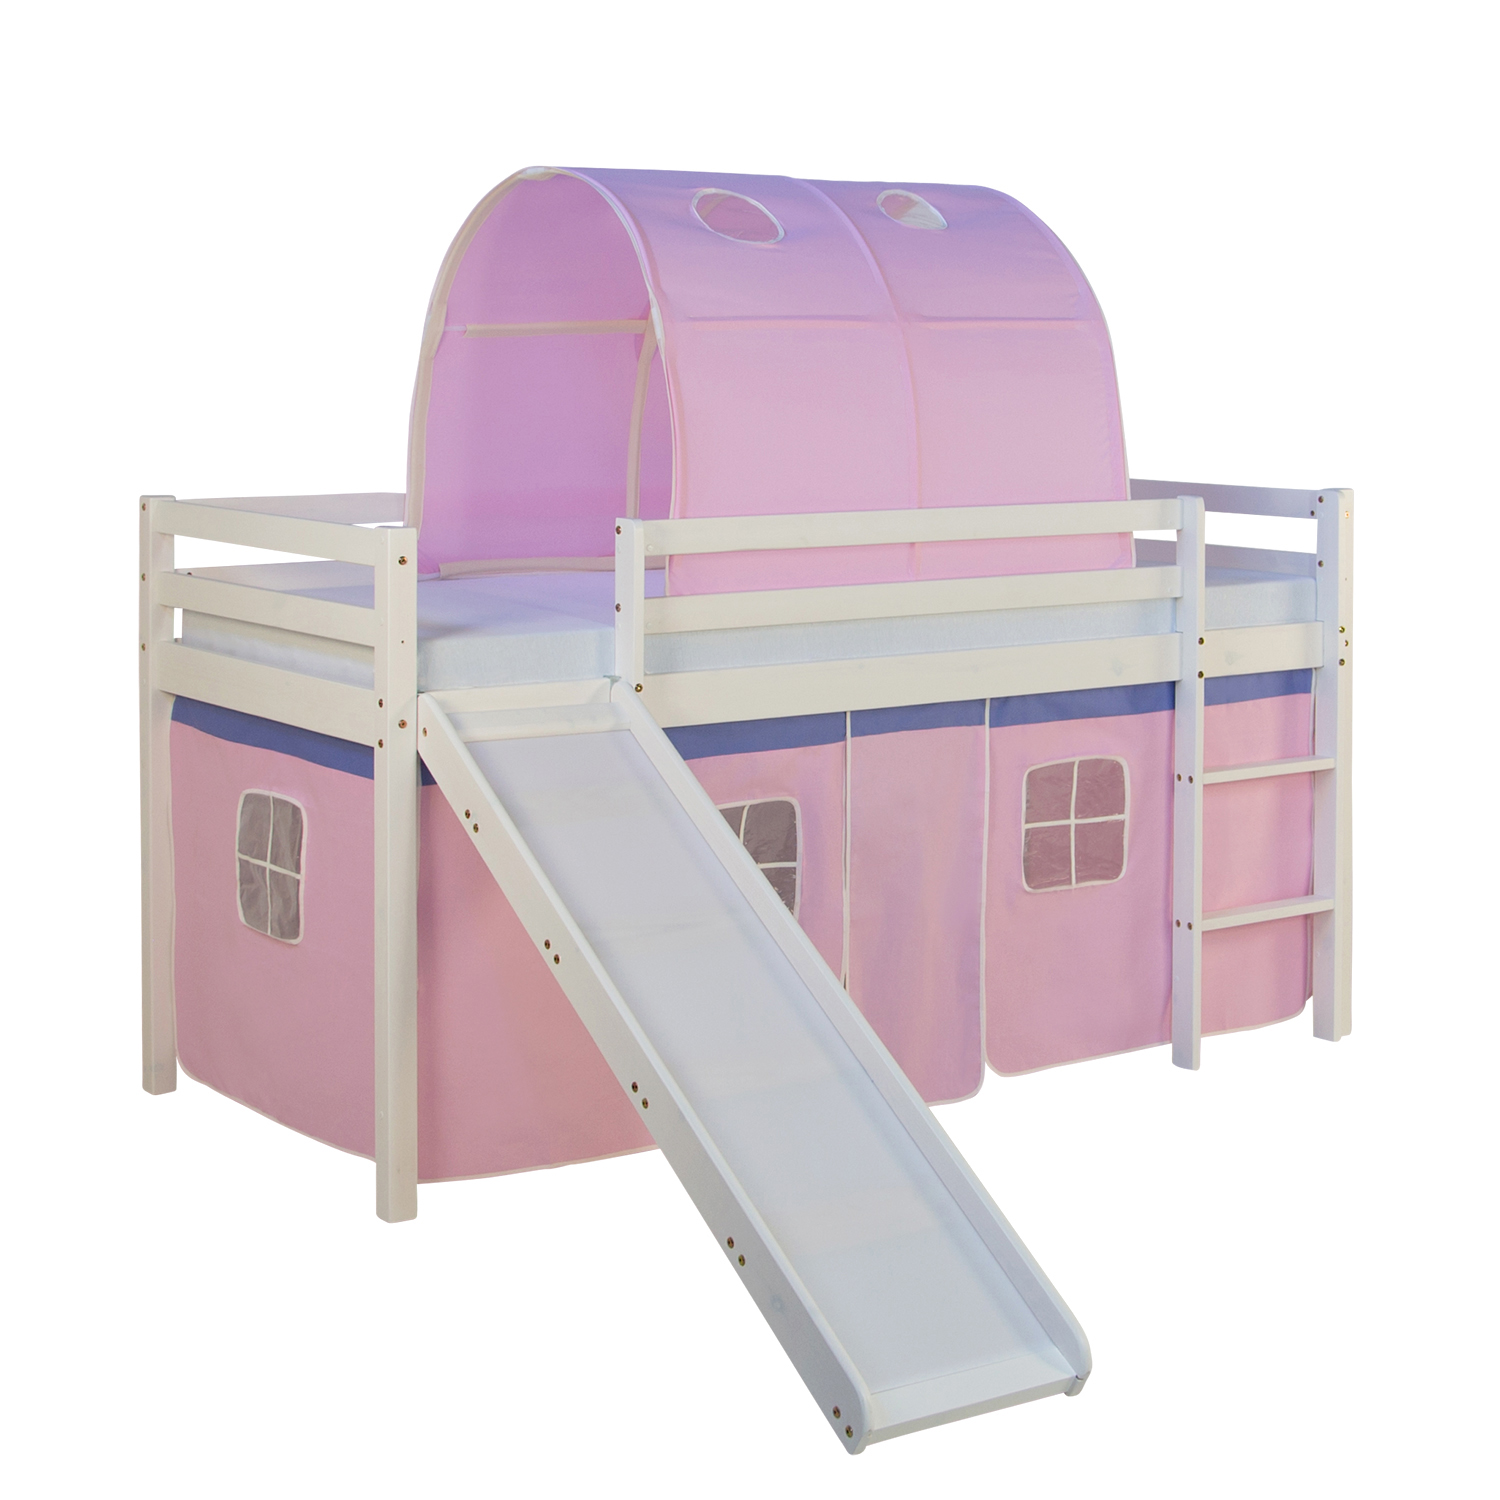 Loftbed 90x200 cm Bunk bed Childrens bed Solid Pine Wood Tower Tunnel Curtain Pink Slide Mattress Slats